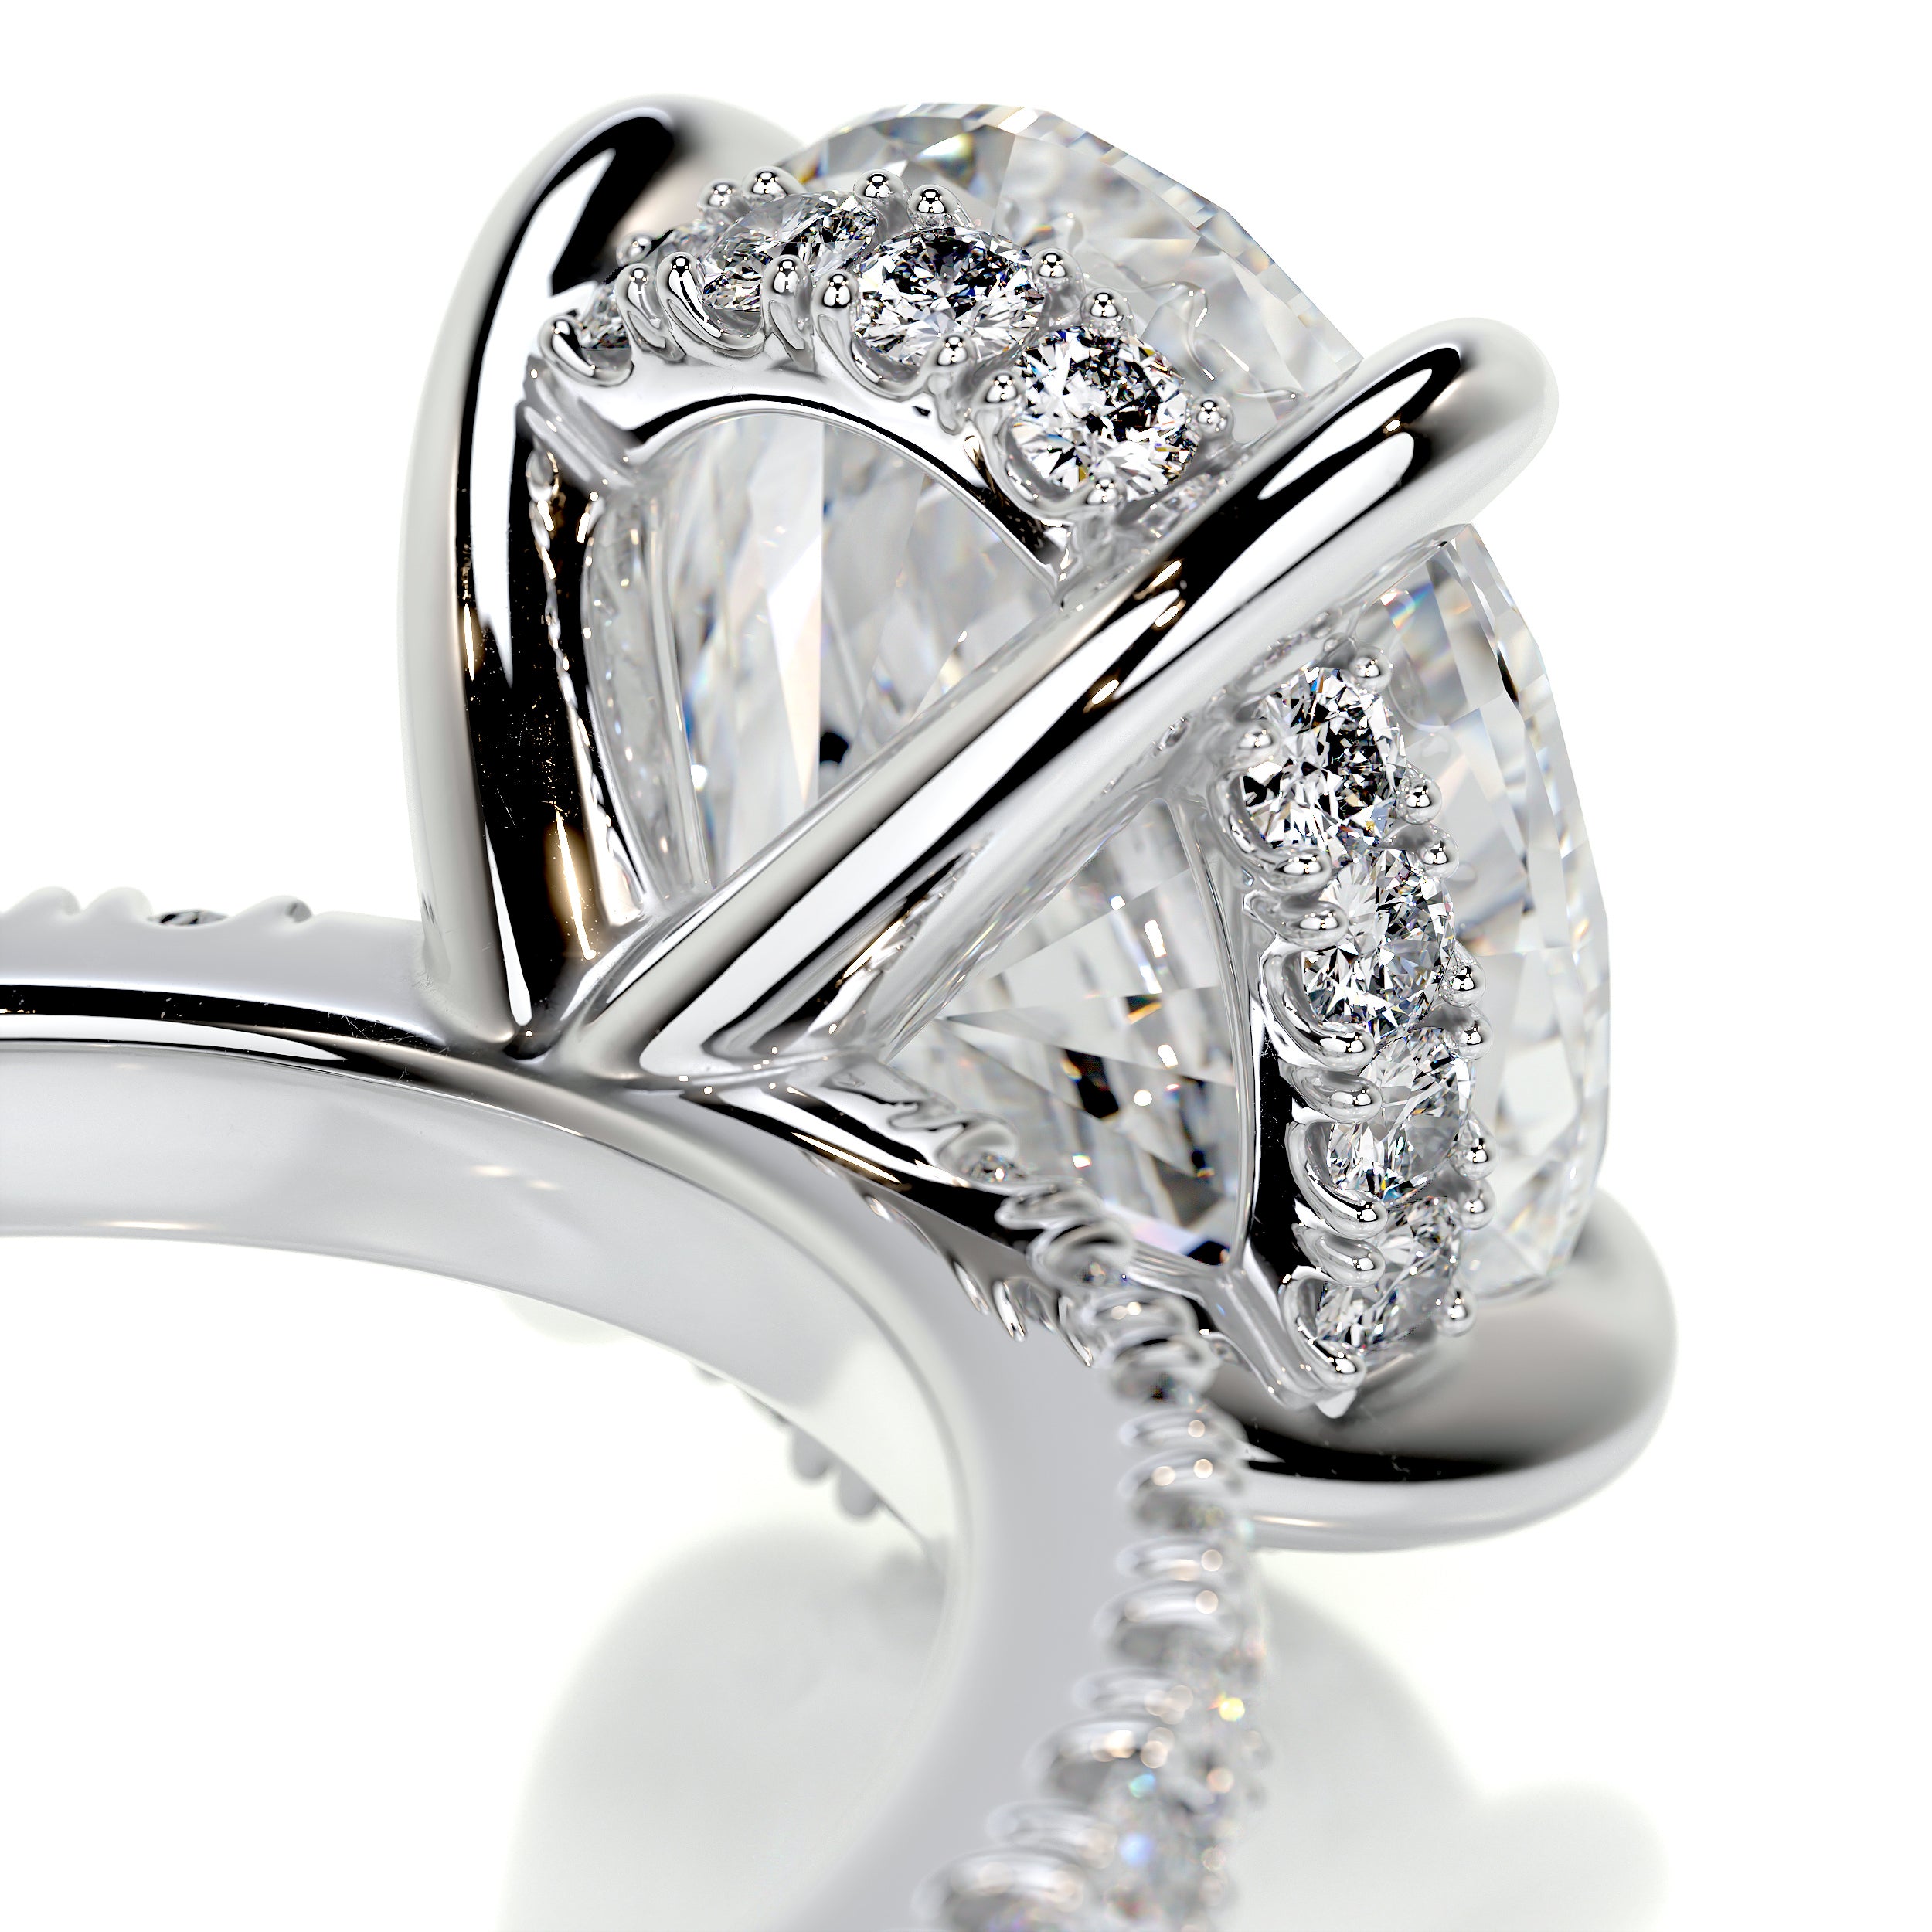 Lucy Diamond Engagement Ring -18K White Gold